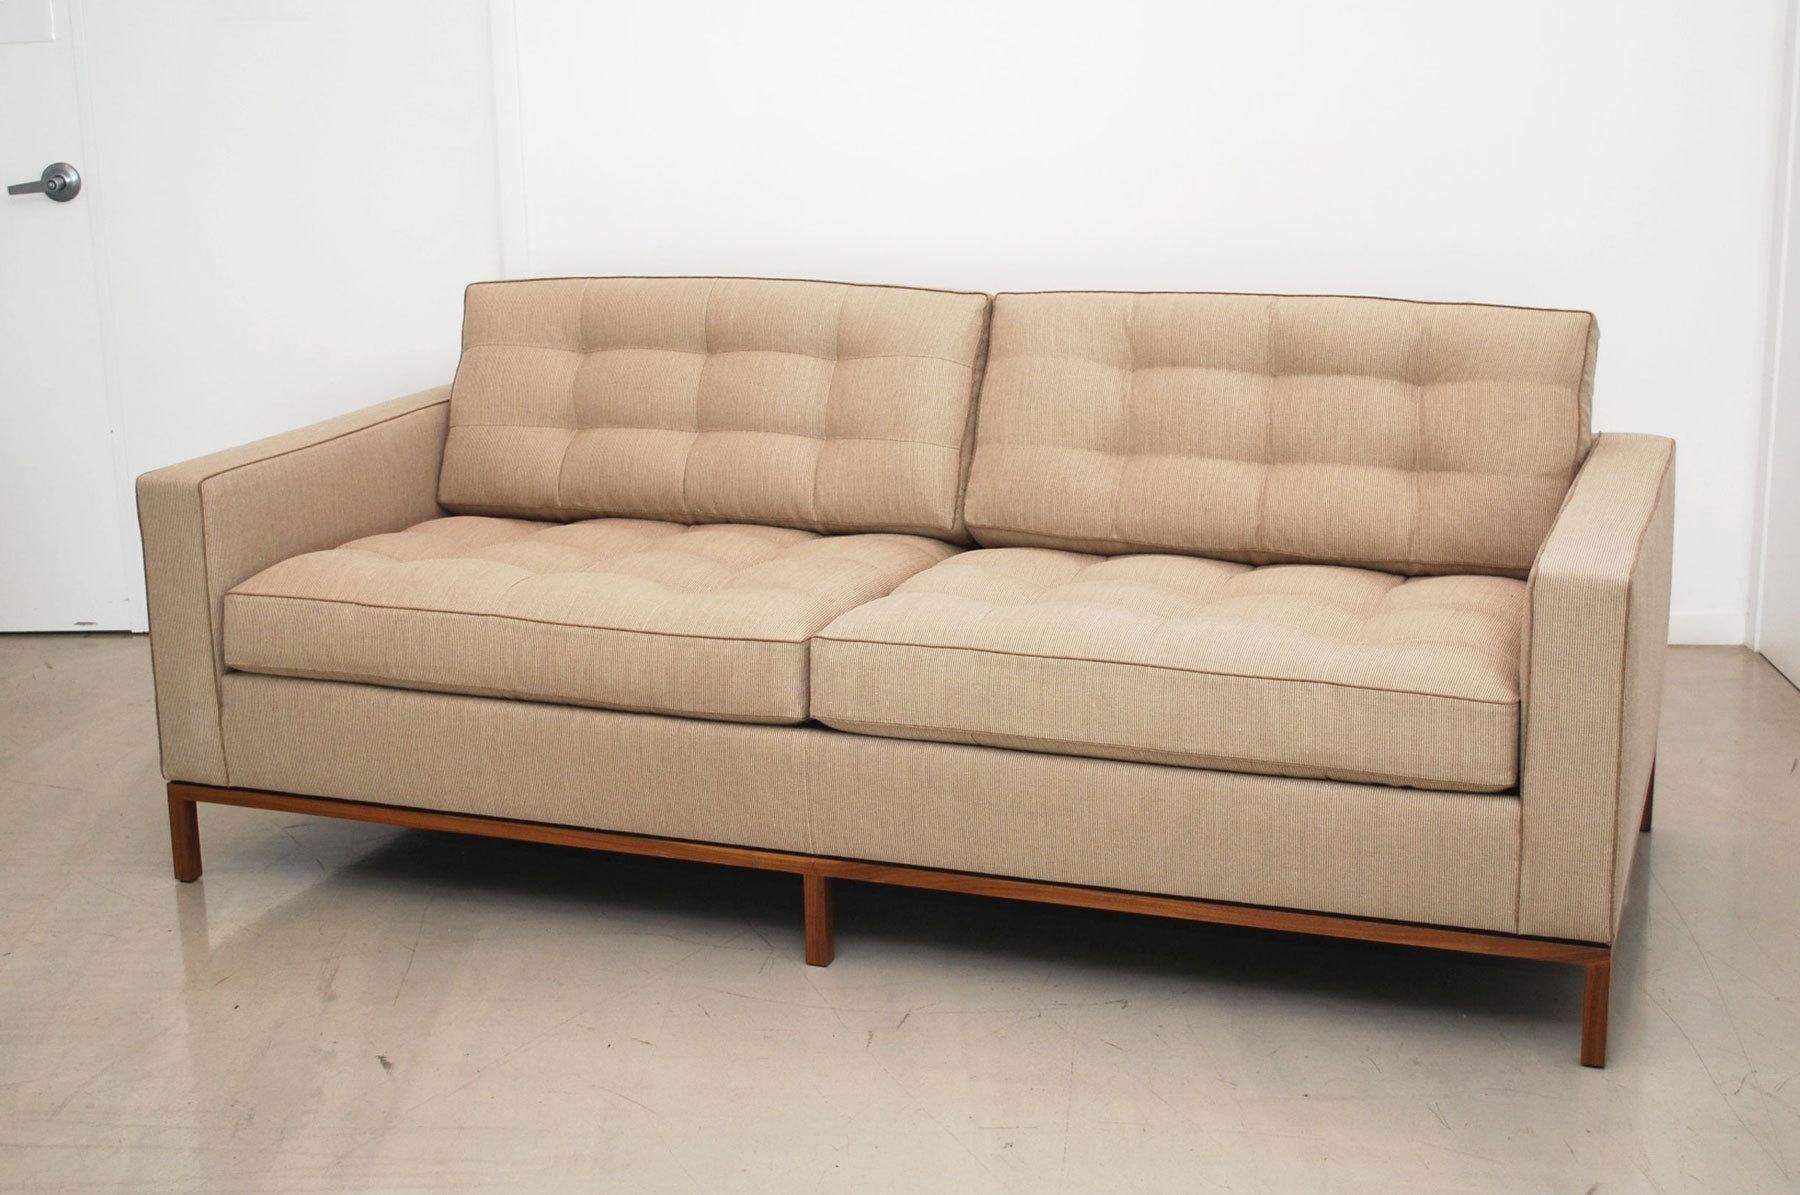 Florence Knoll Sofa | Home Decor & Furniture Pertaining To Florence Sofas (View 20 of 20)